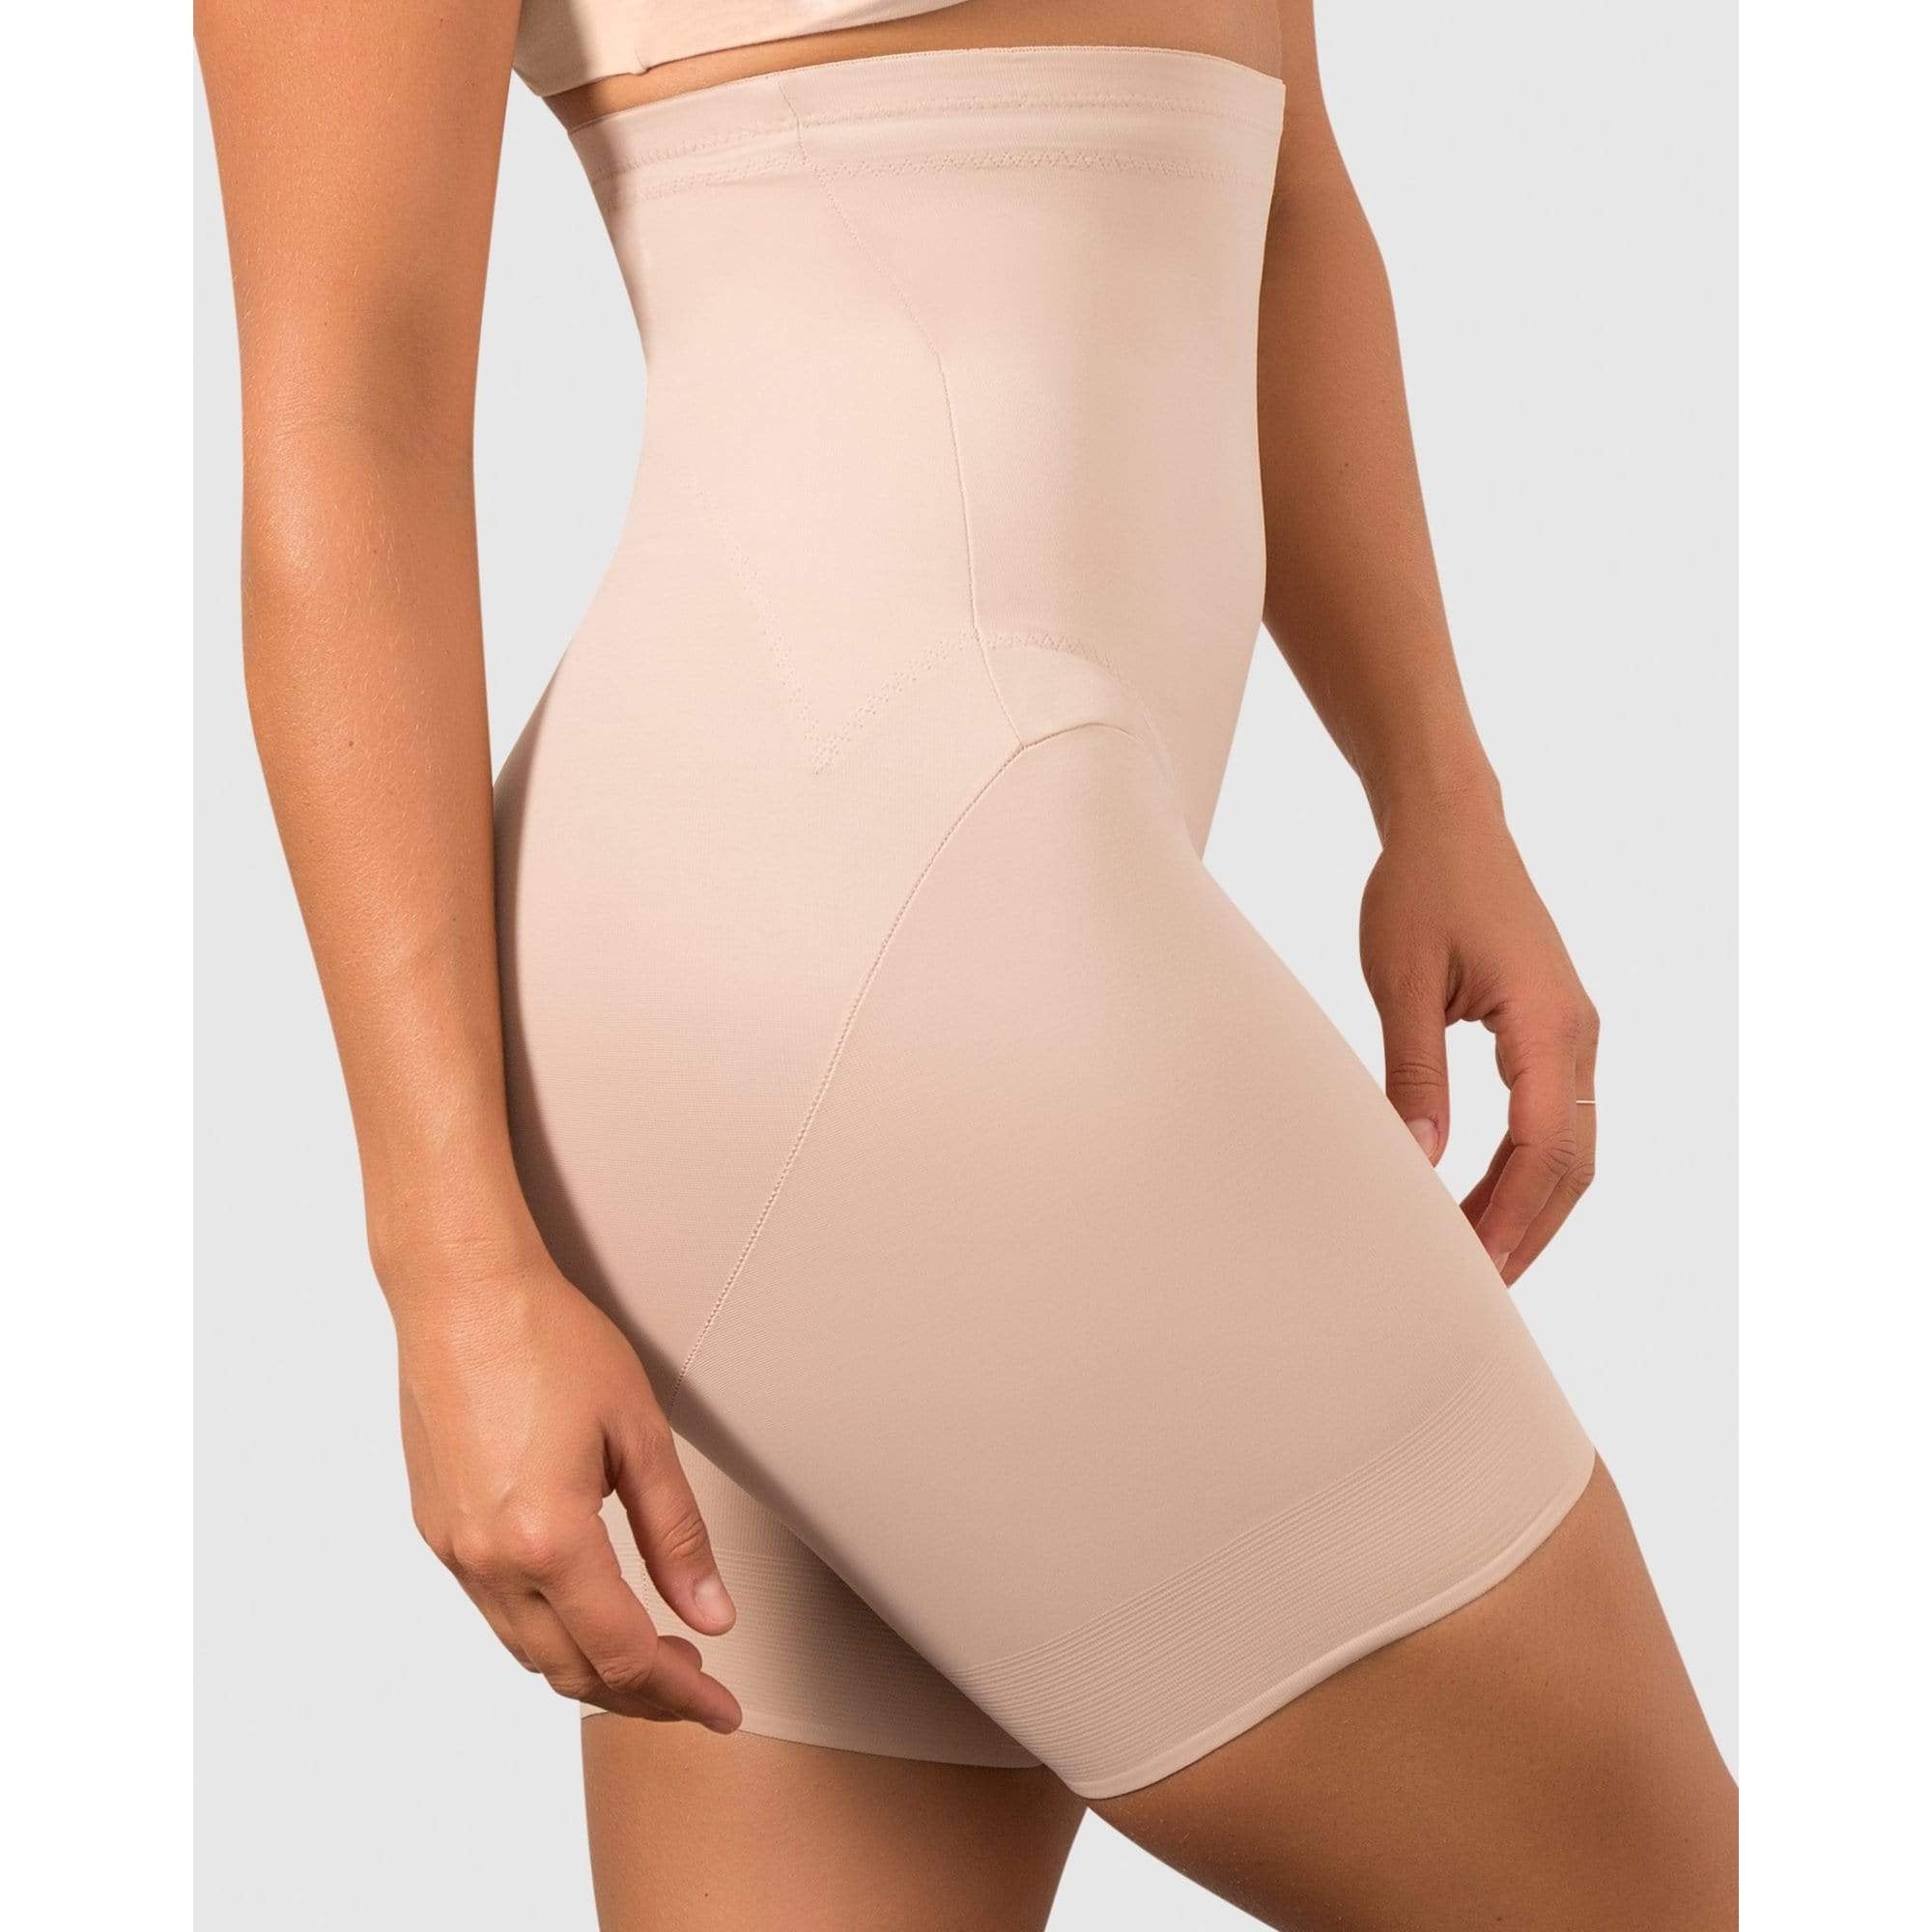 Instant Tummy Tuck Shapewear - Featured